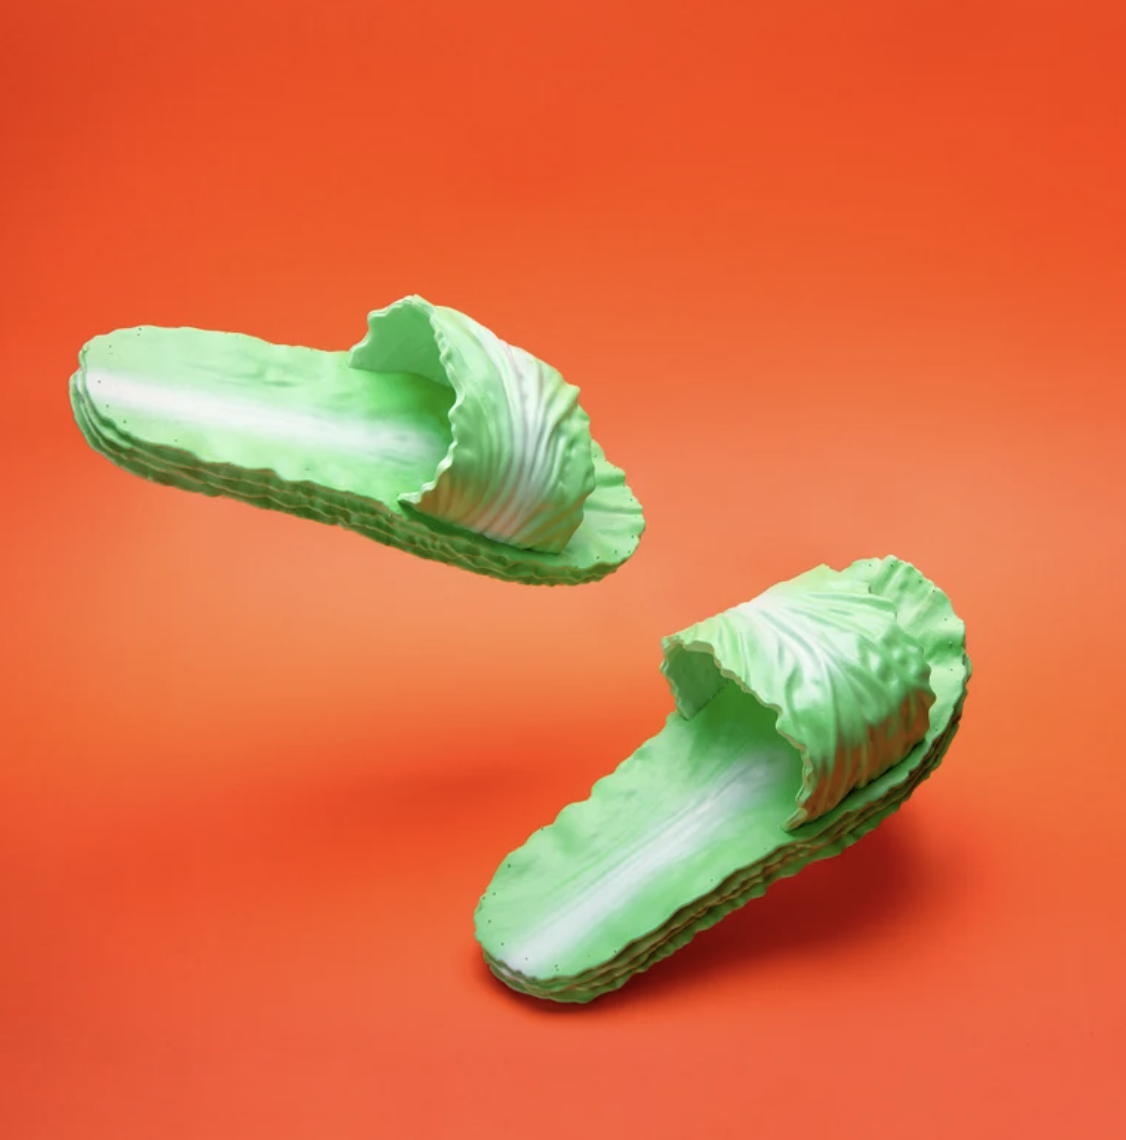 Cabbage themed slippers on orange background.